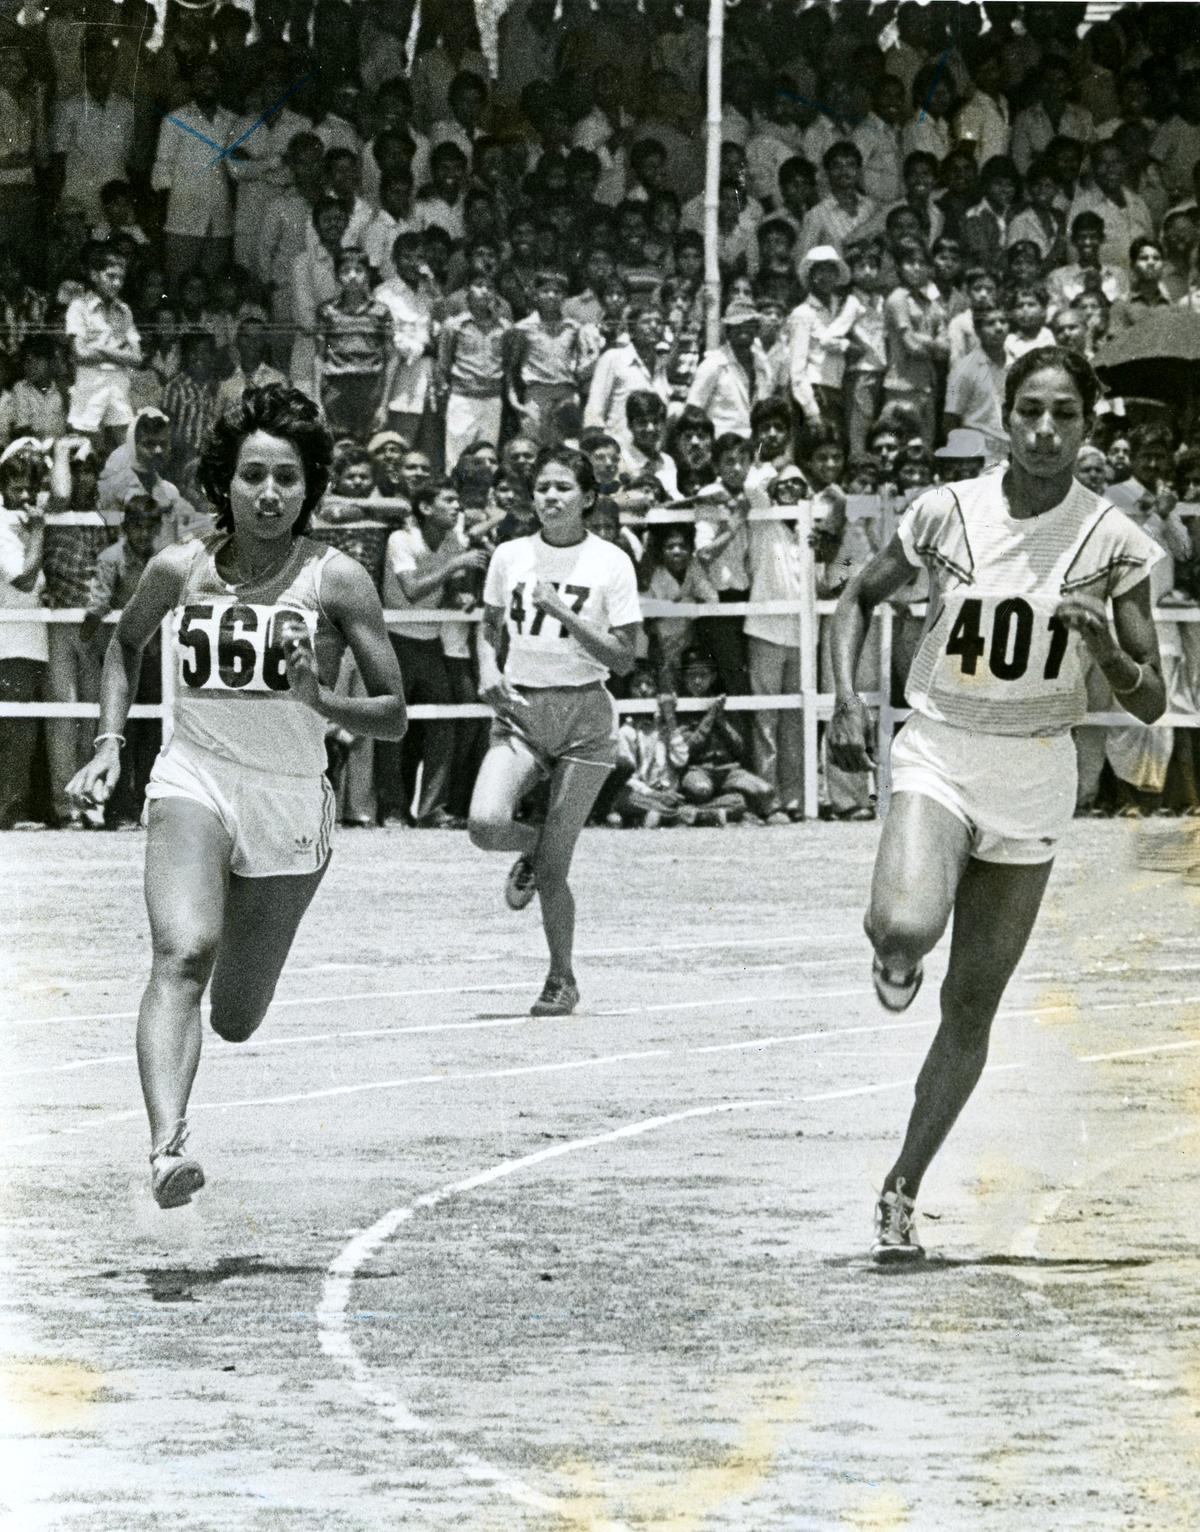 Top talent: Ashwini, left, was one of the rare athletes to beat the legendary P.T. Usha, right, in her prime. | Photo credit: The Hindu Archives